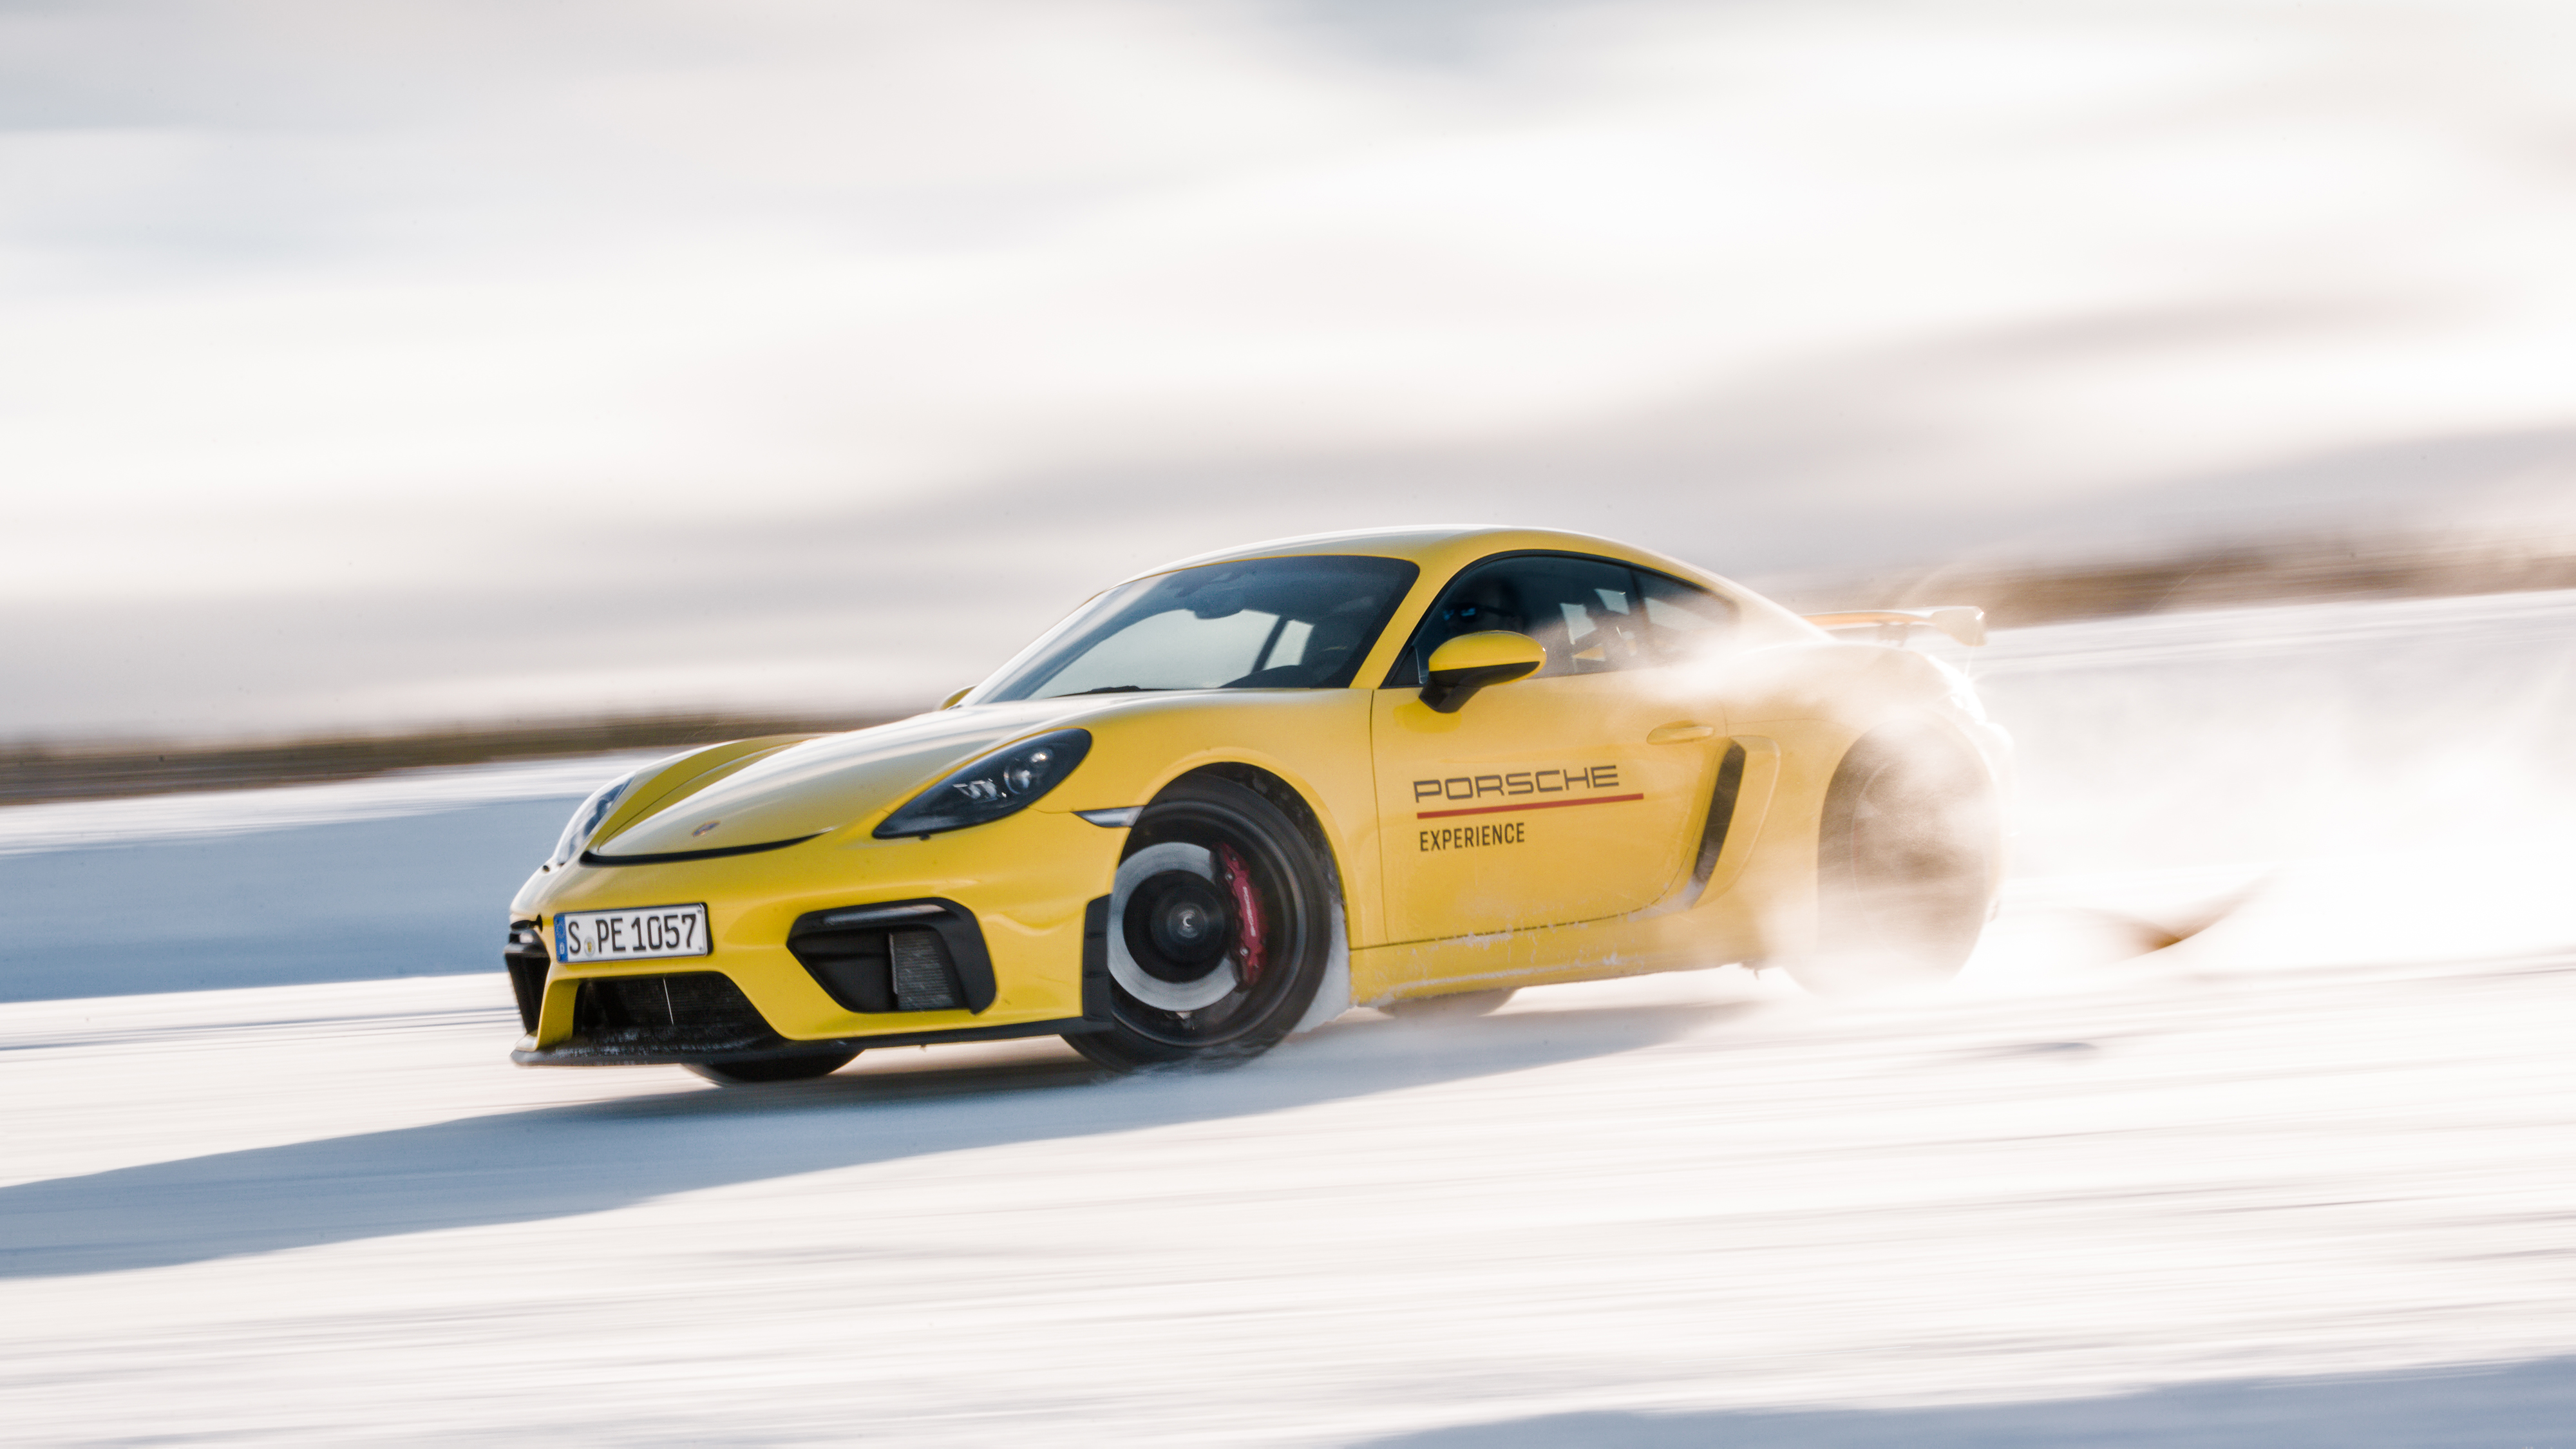 Porshe driving on the ice